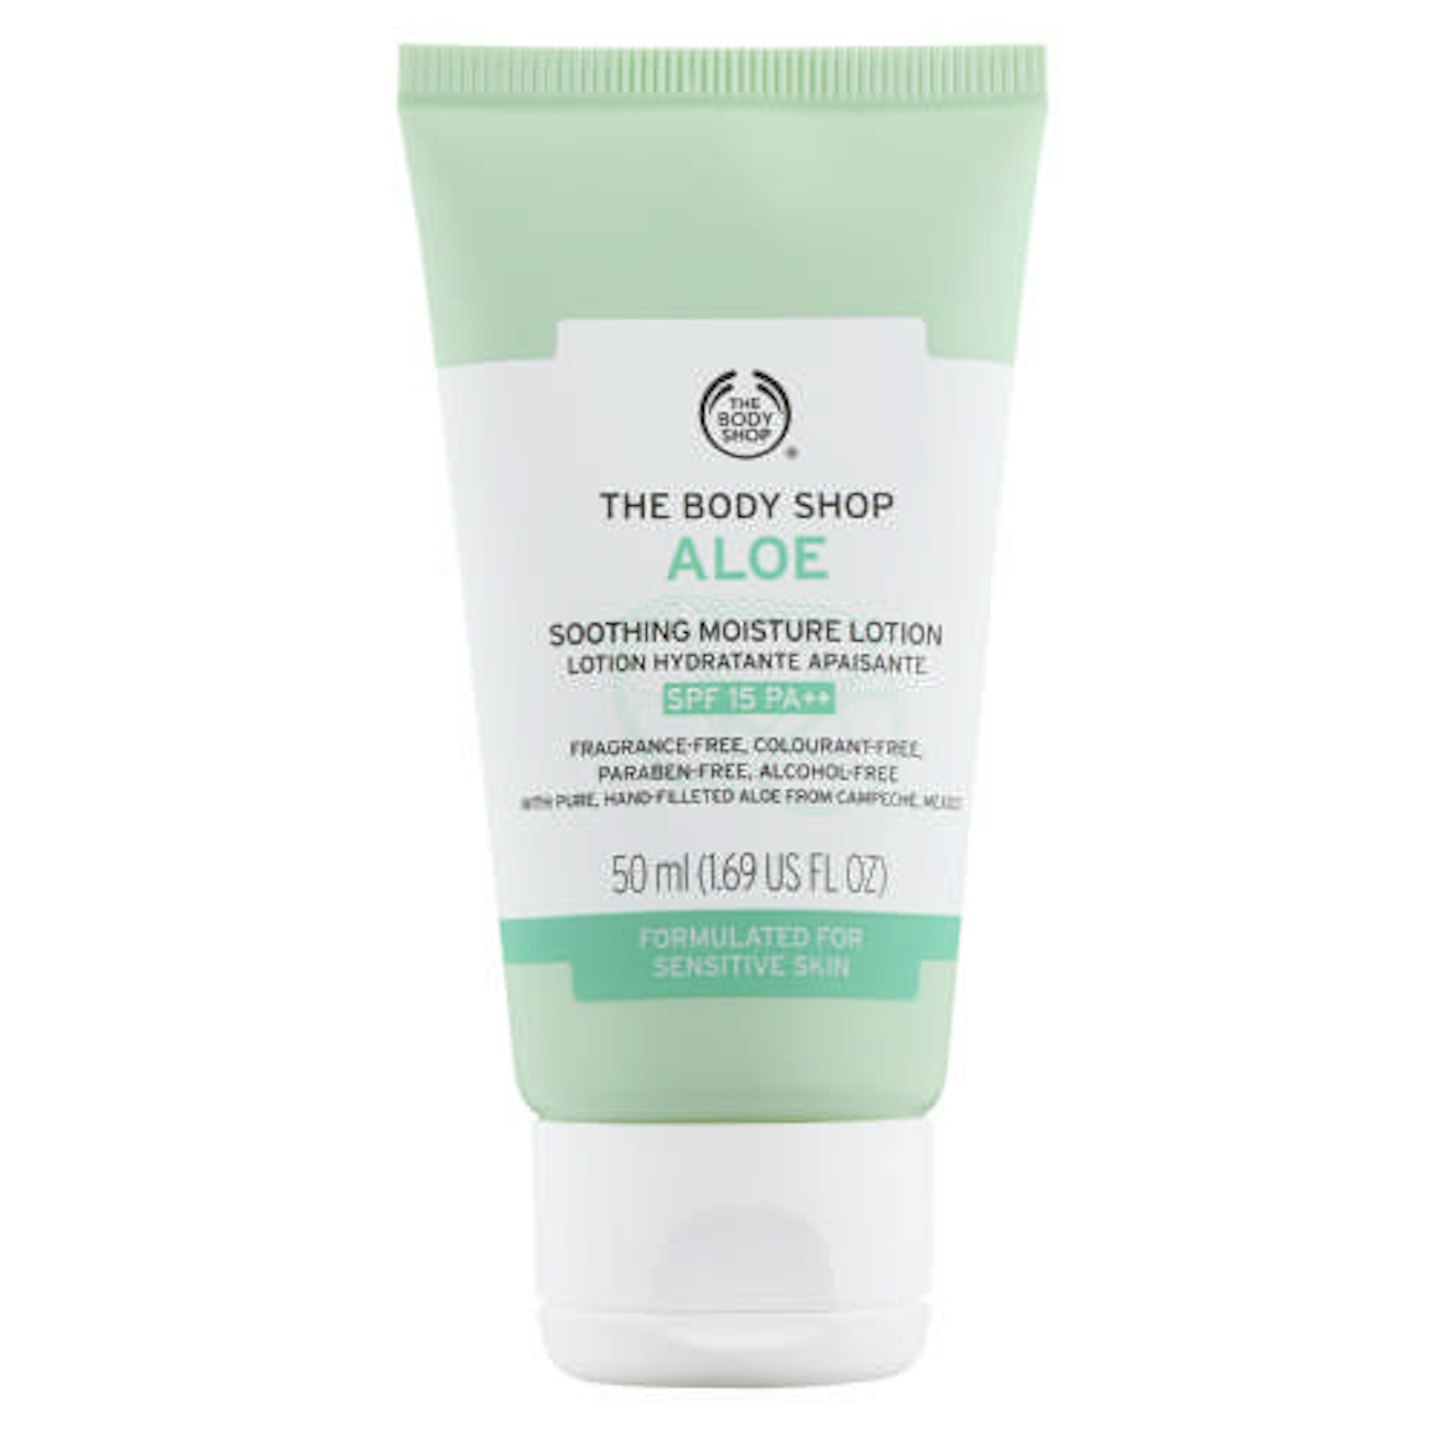 The Body Shop Aloe Soothing Moisture Lotion SPF15, £15